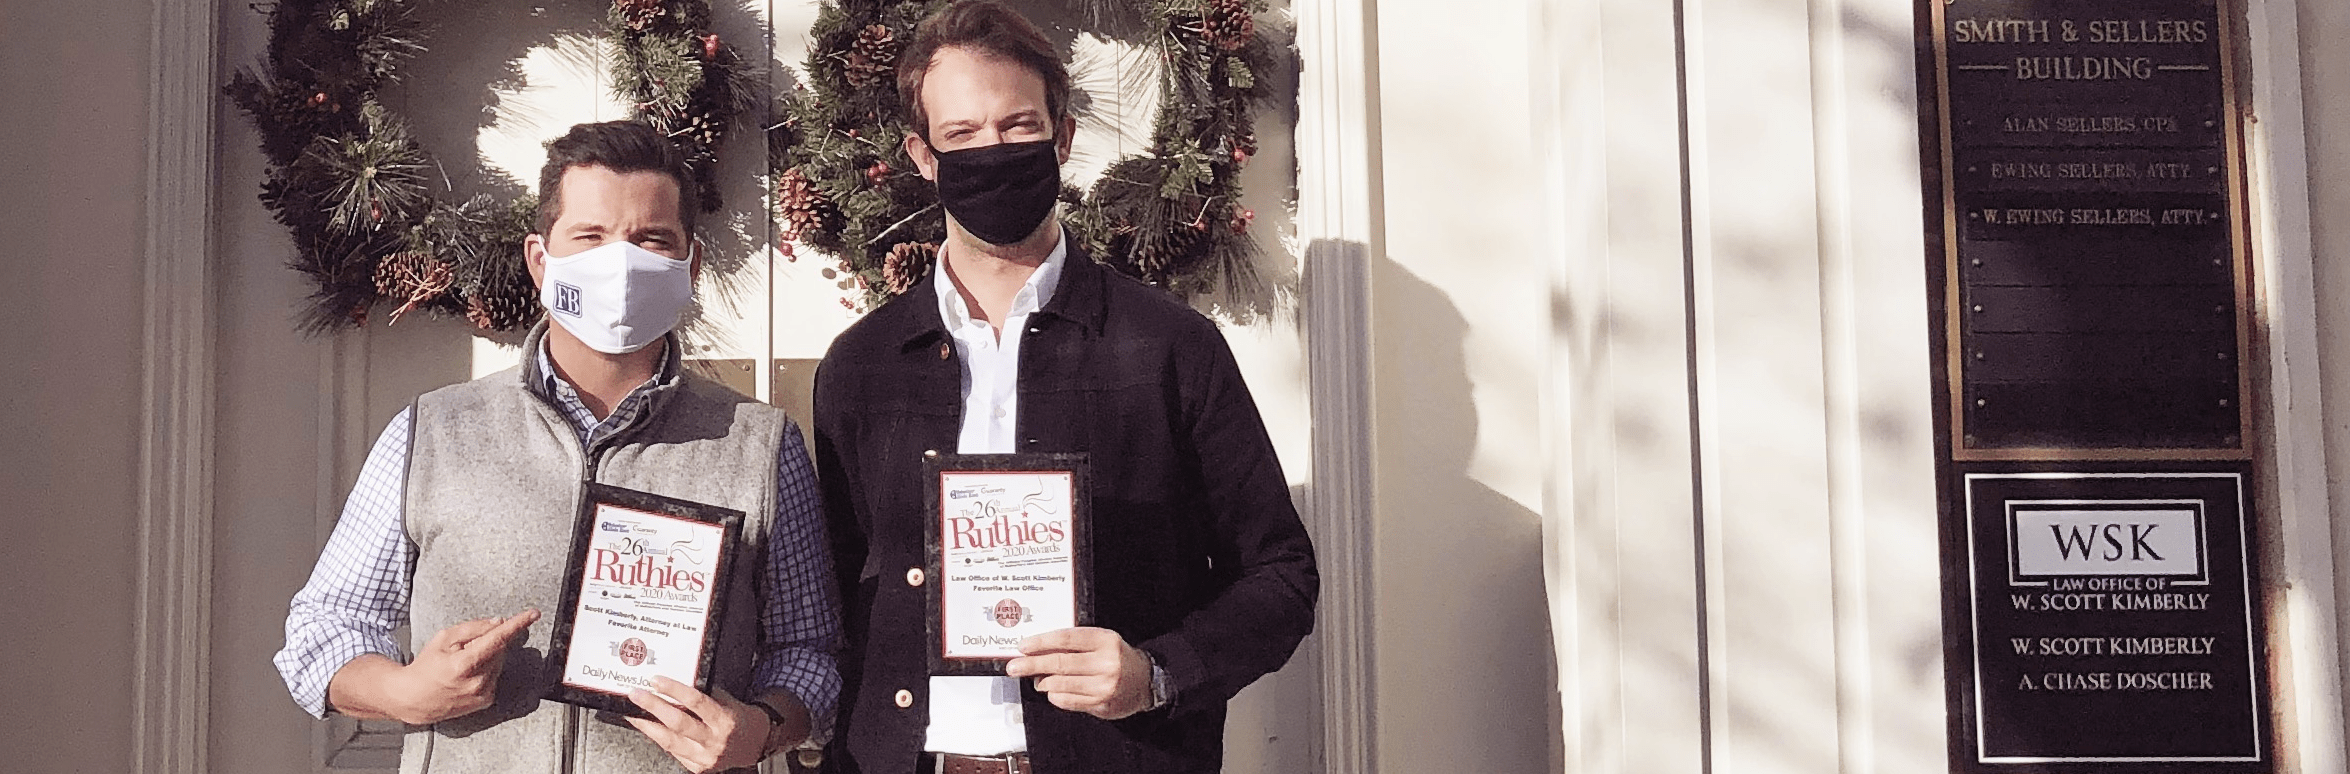 Two Men in Masks Holding Books in Hand